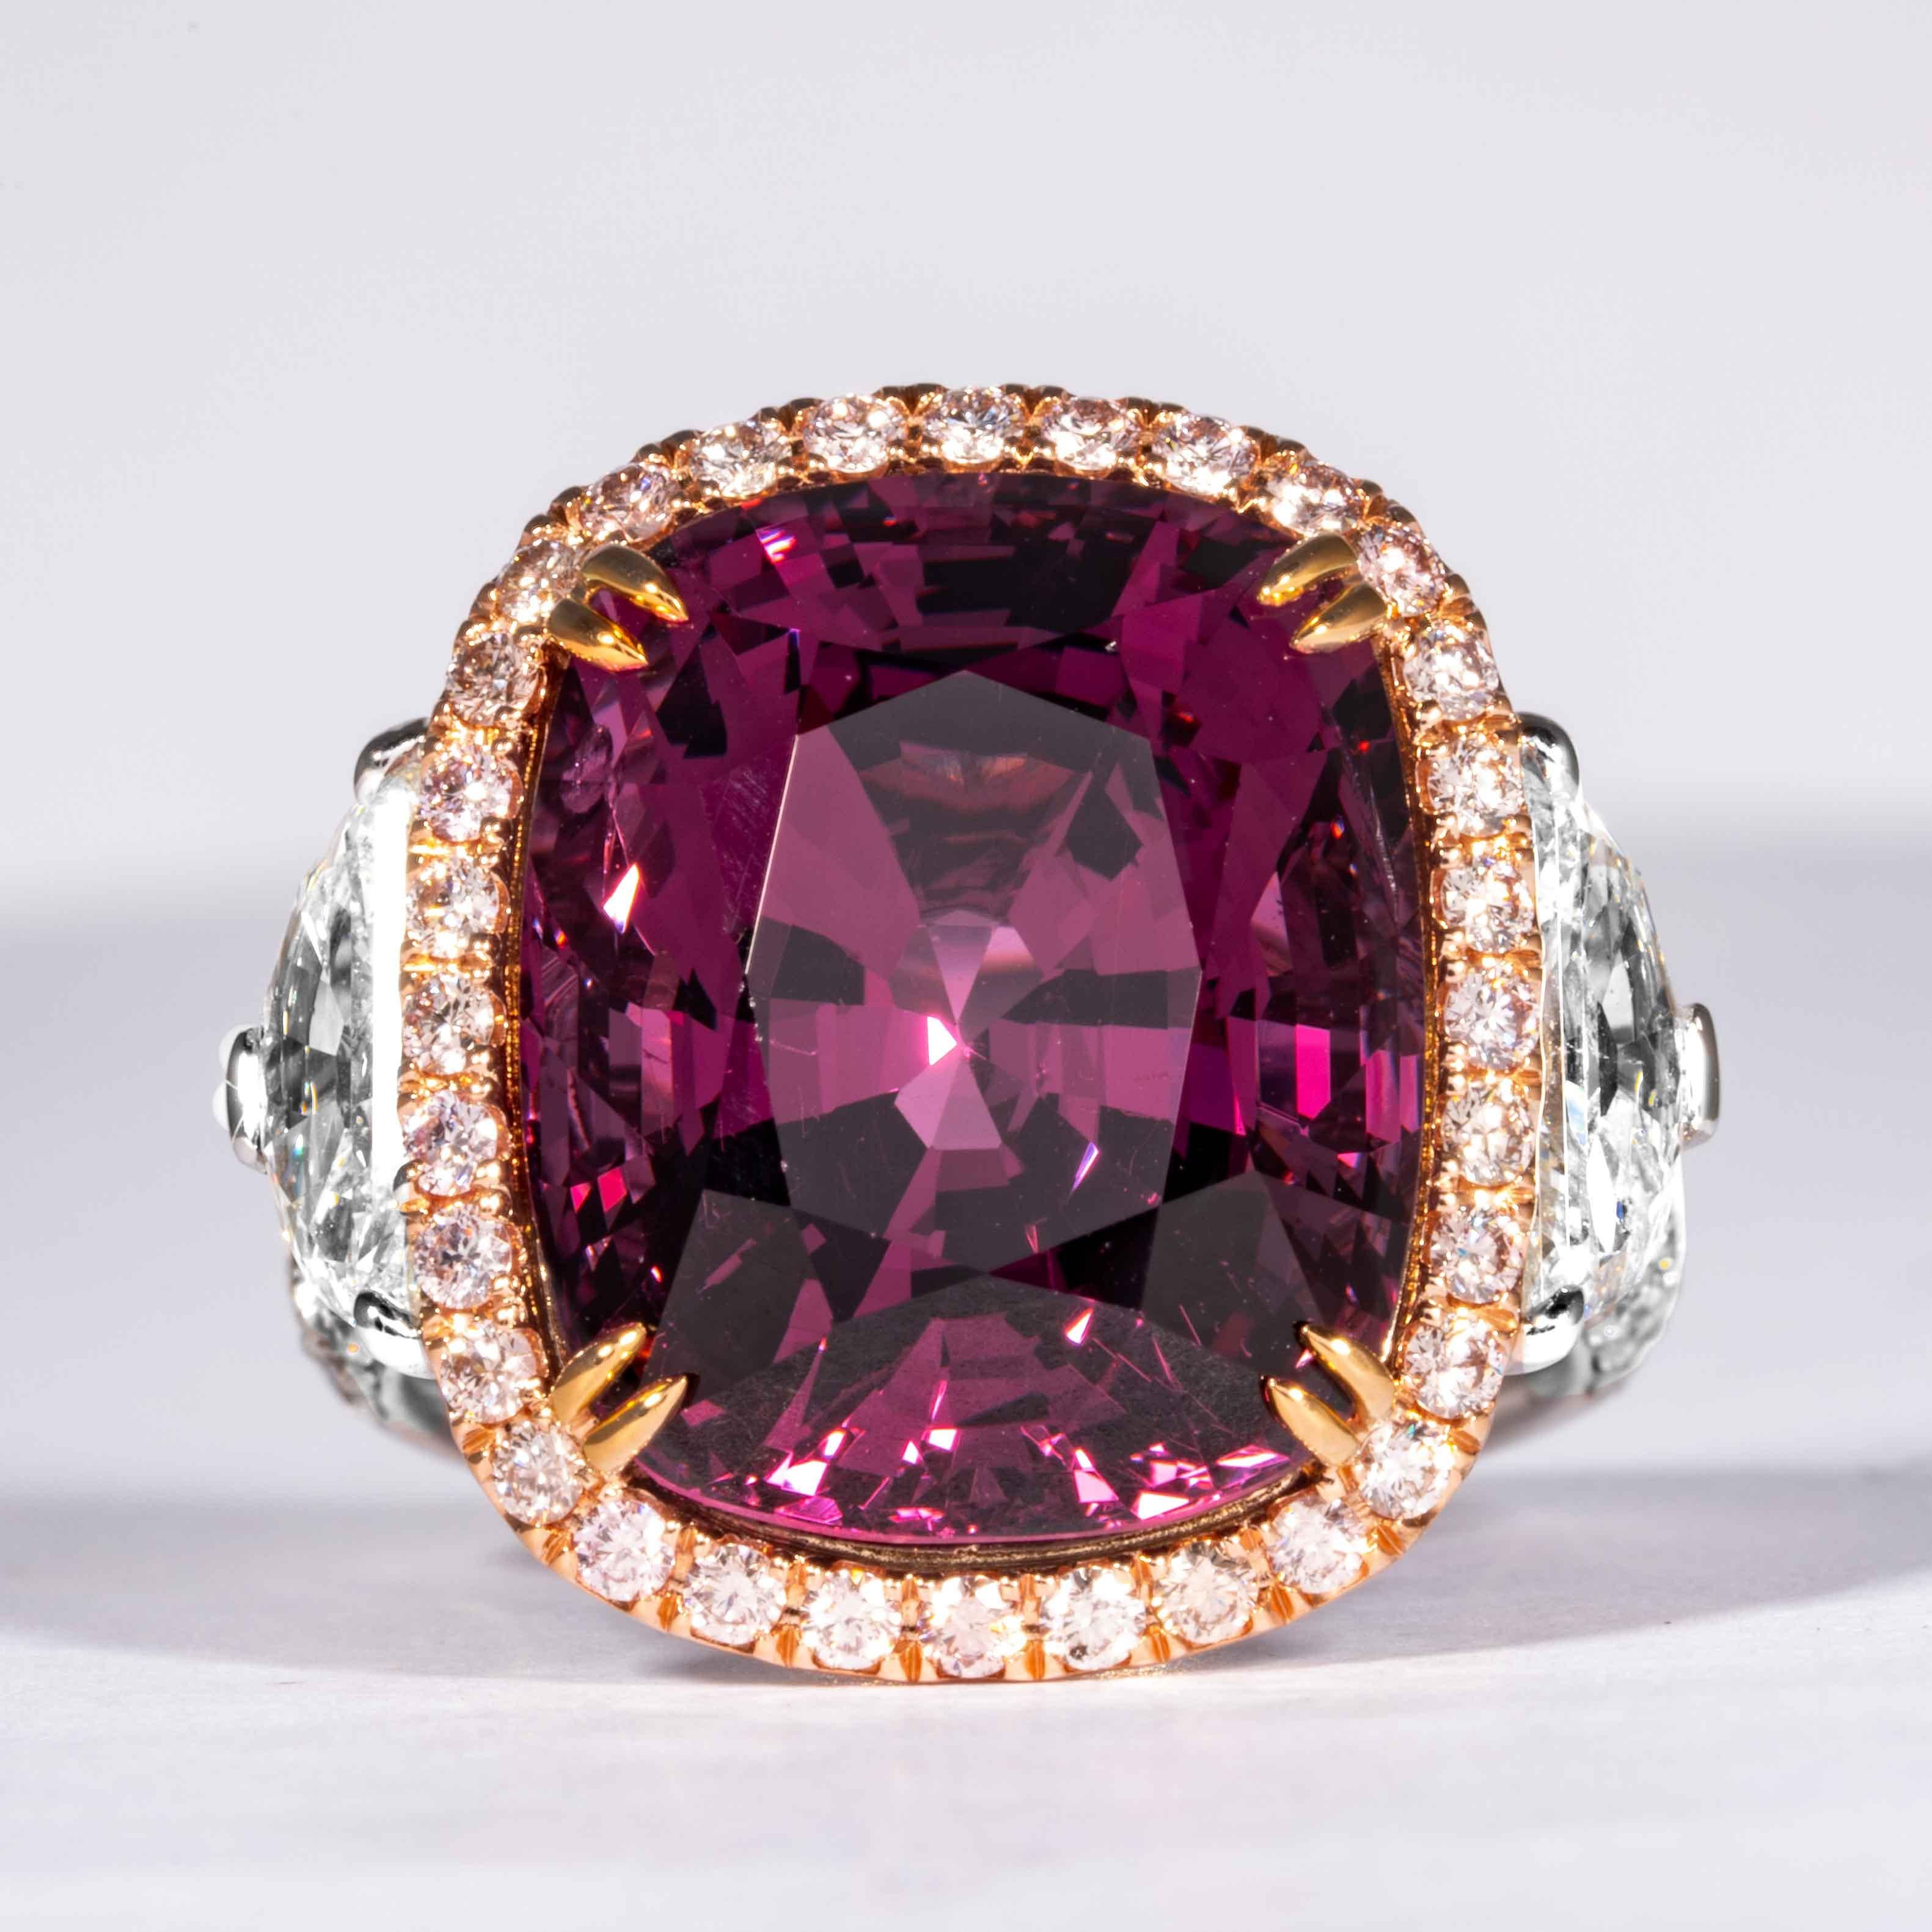 Cushion Cut Shreve, Crump & Low 15.38 Carat Burmese Pink Spinel and Diamond Ring 'Dungaire'